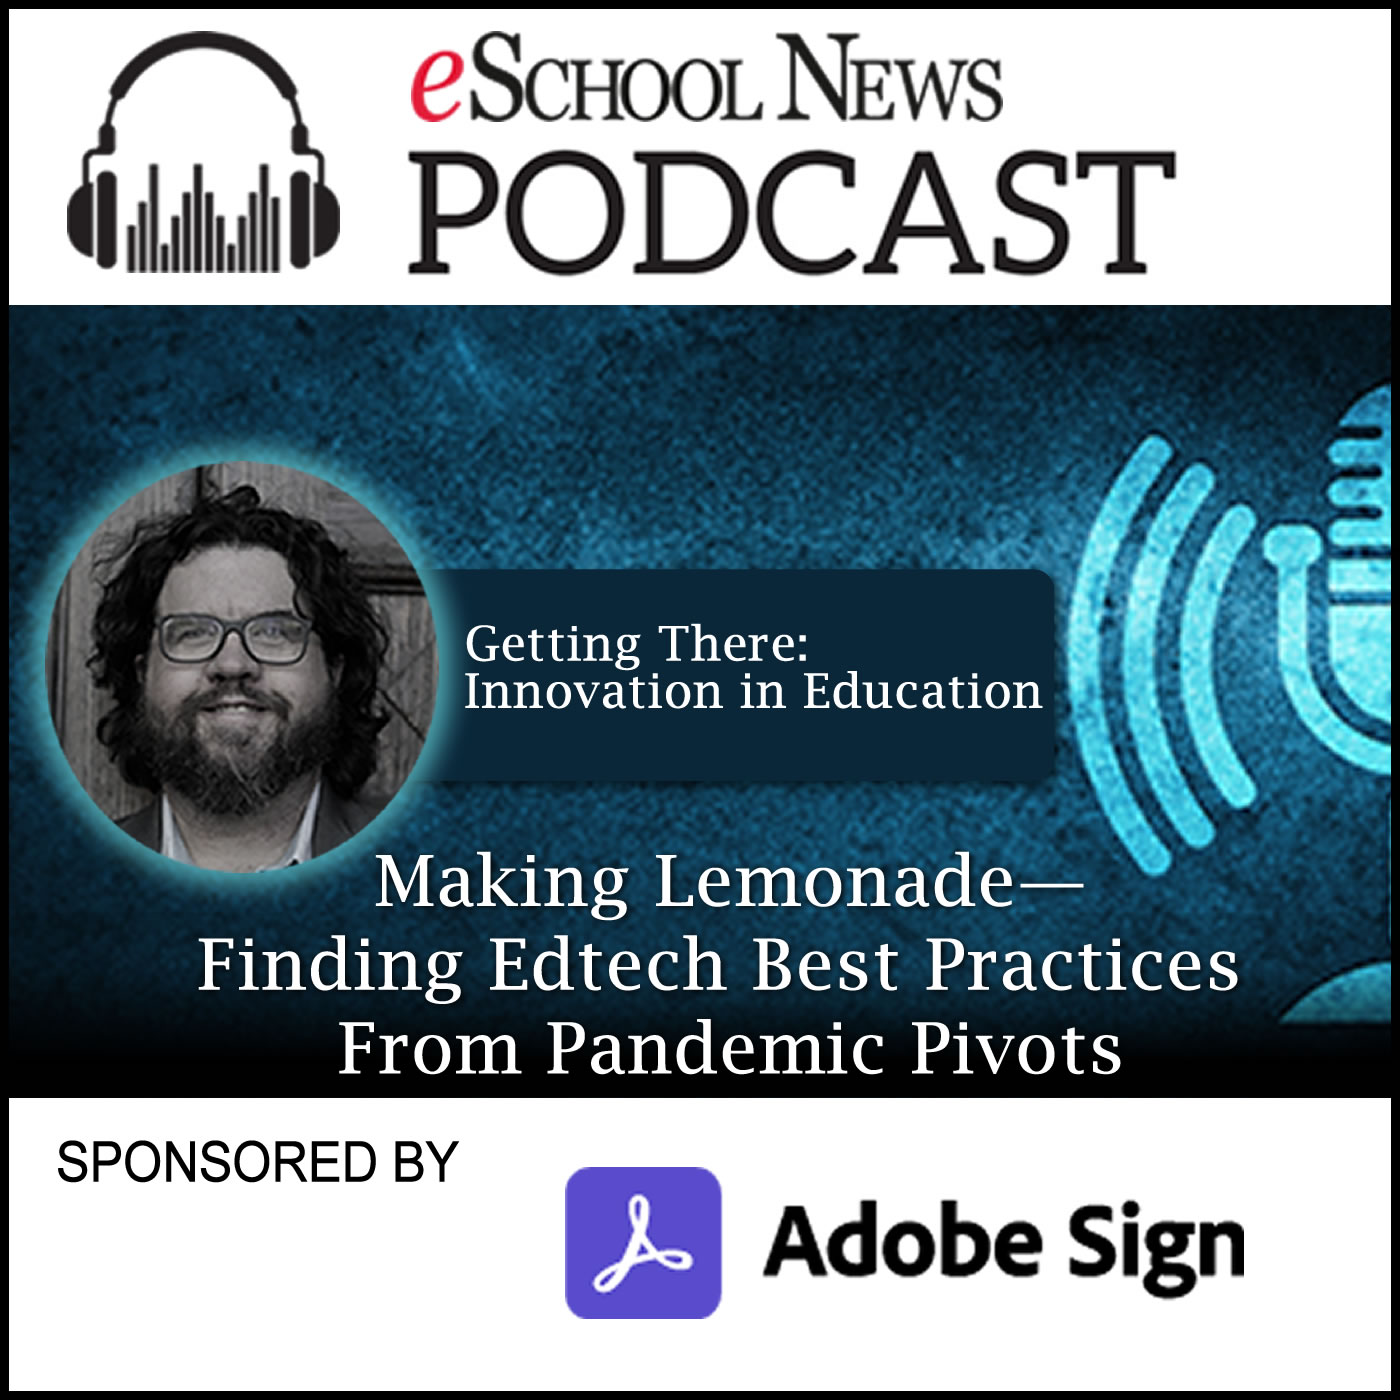 Making Lemonade—Finding Edtech Best Practices From Pandemic Pivots